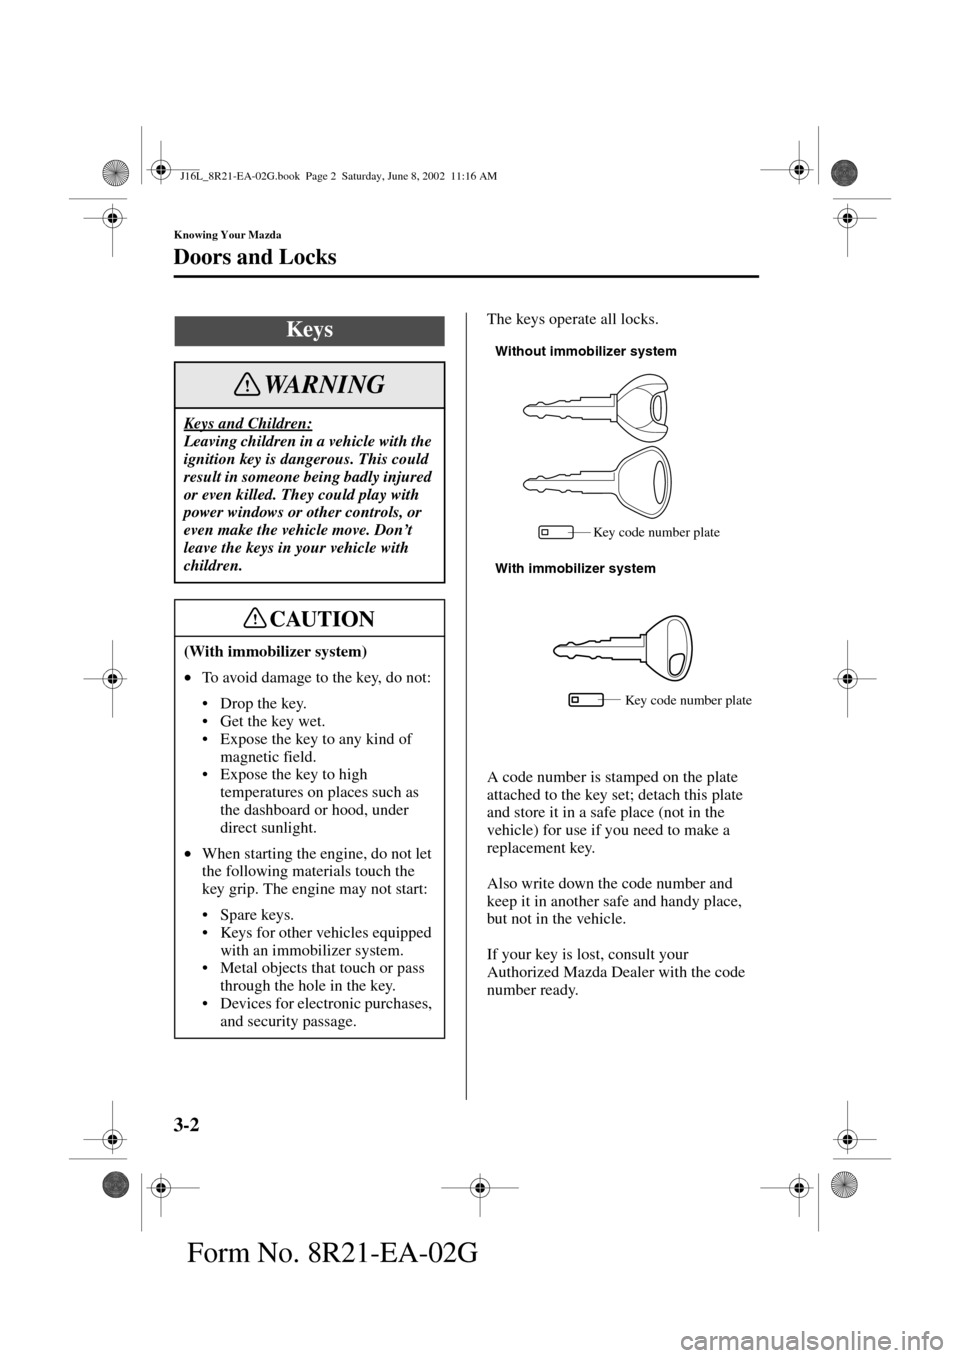 MAZDA MODEL MPV 2003  Owners Manual (in English) 3-2
Knowing Your Mazda
Form No. 8R21-EA-02G
Doors and Locks
The keys operate all locks.
A code number is stamped on the plate 
attached to the key set; detach this plate 
and store it in a safe place 